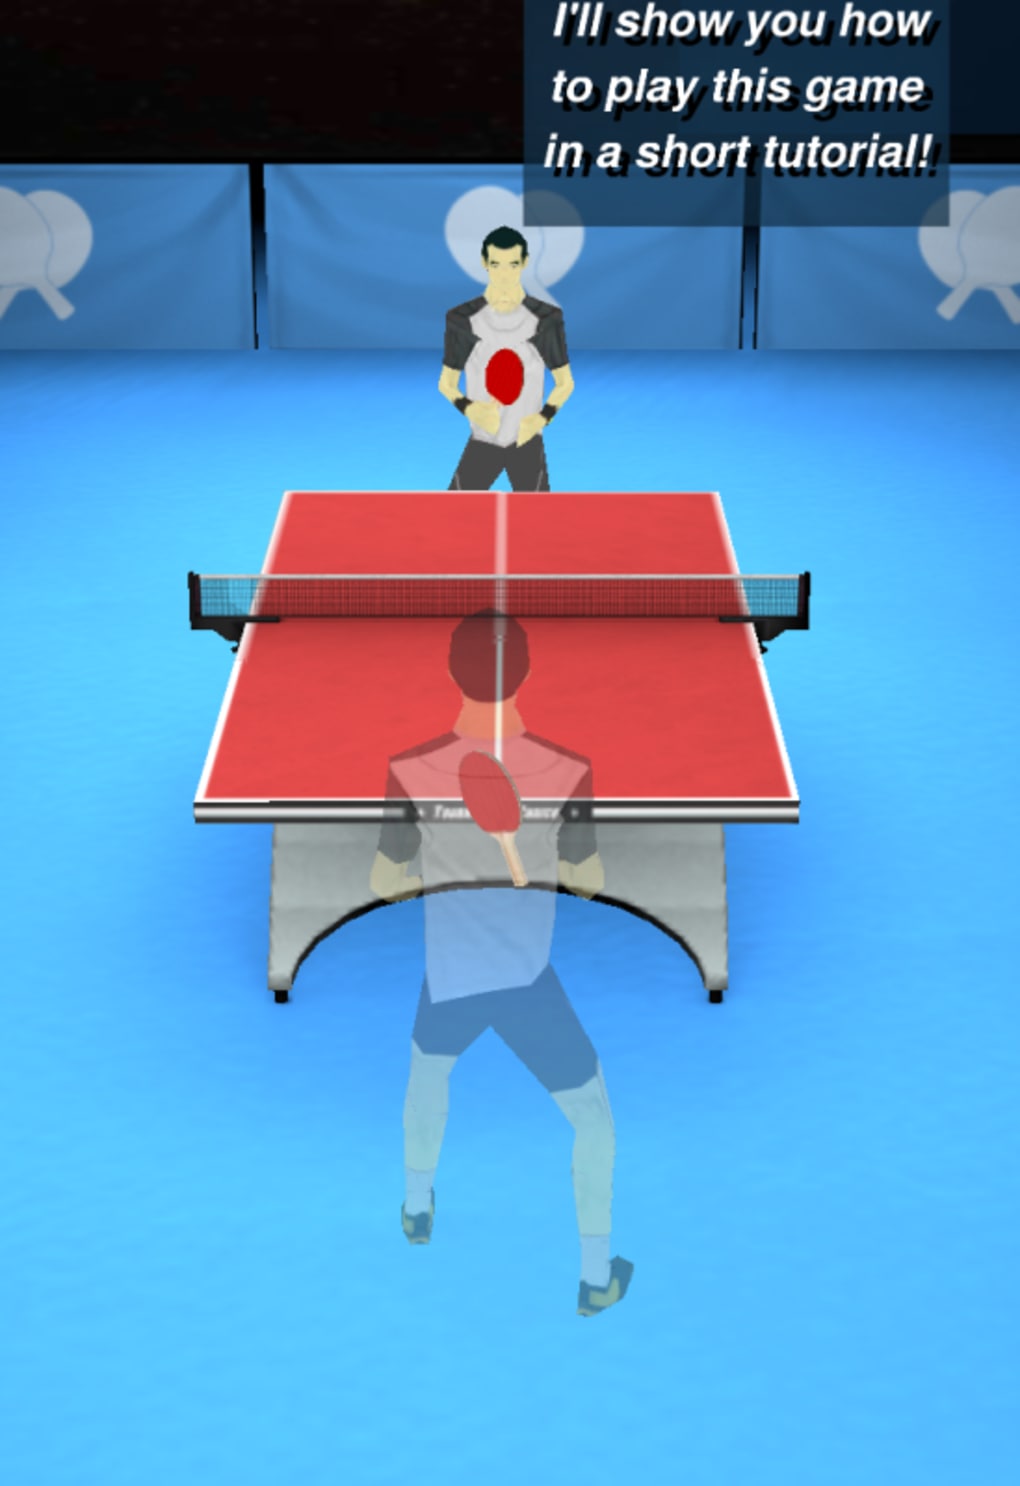 Real Table Tennis for Android